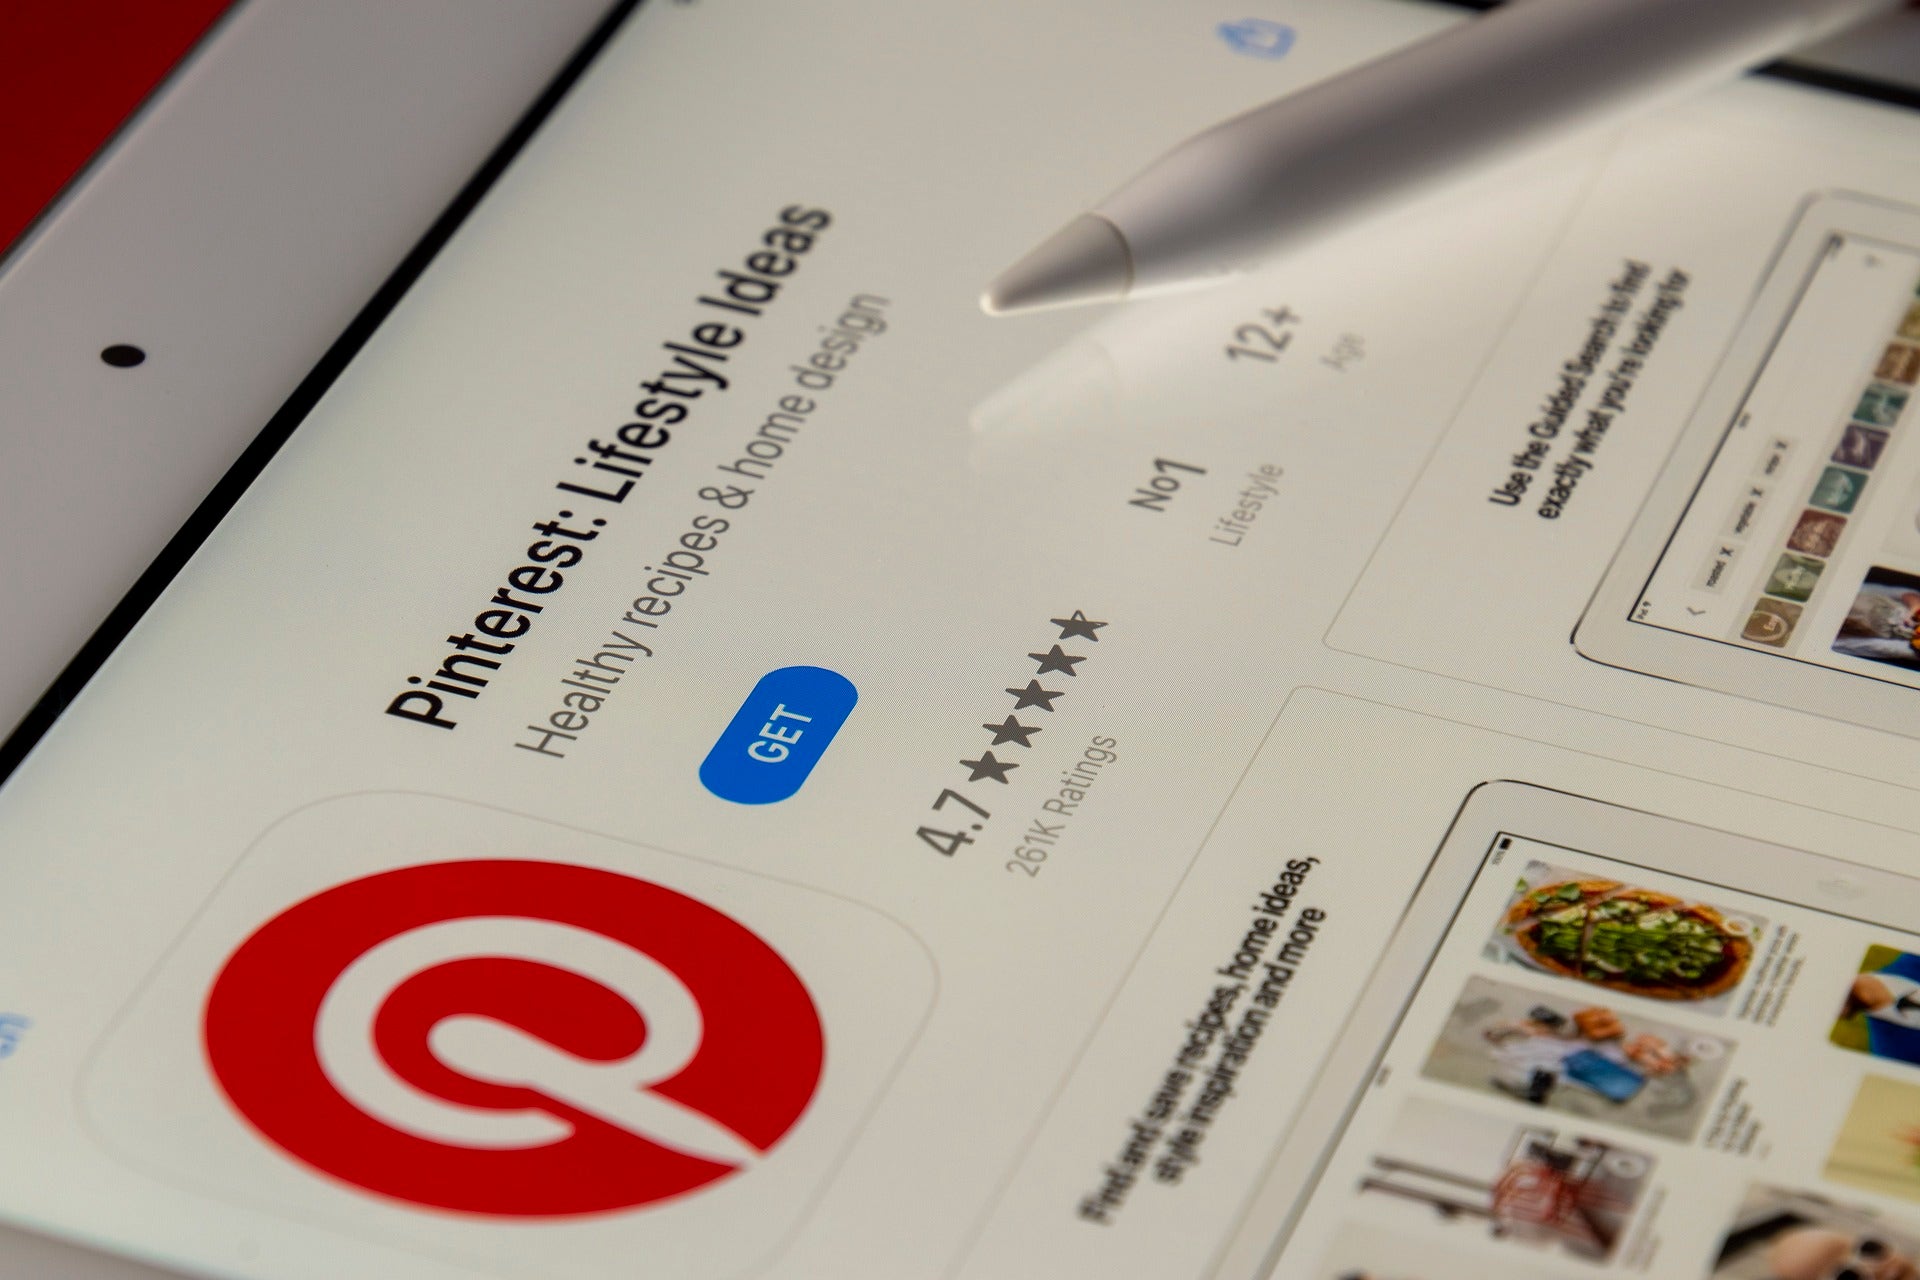 Pinterest Stock Is Popping After Hours: What's Going On?